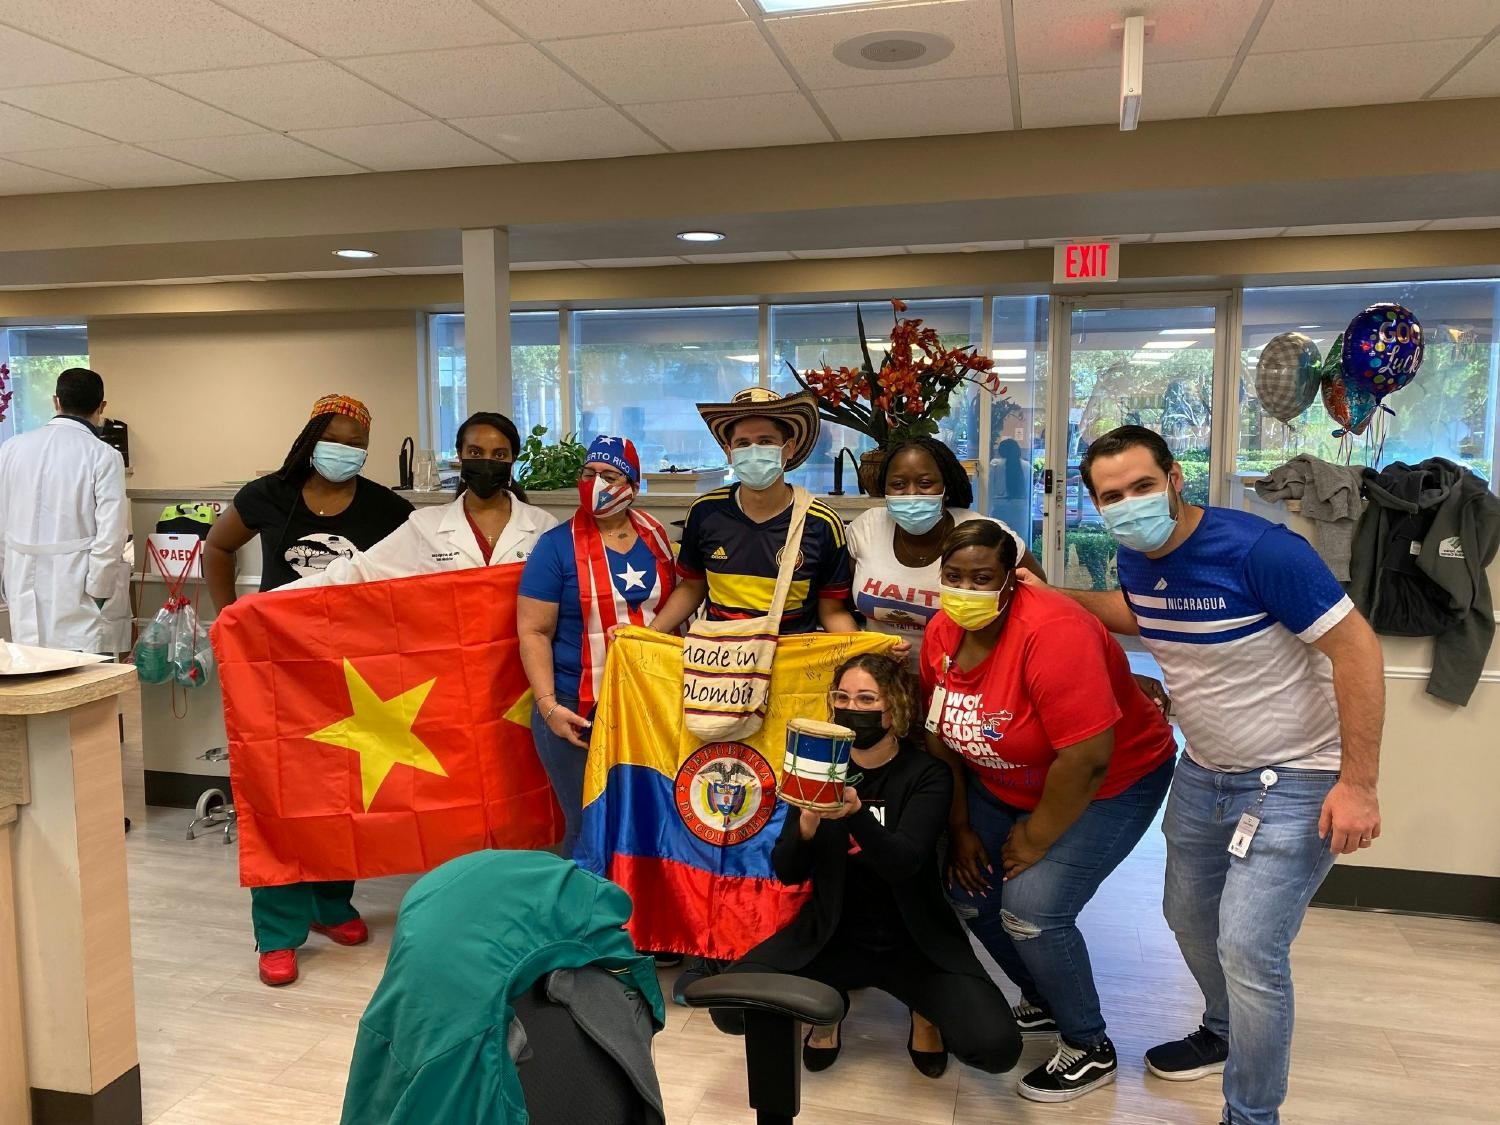 Celebrating our team members Latin heritages